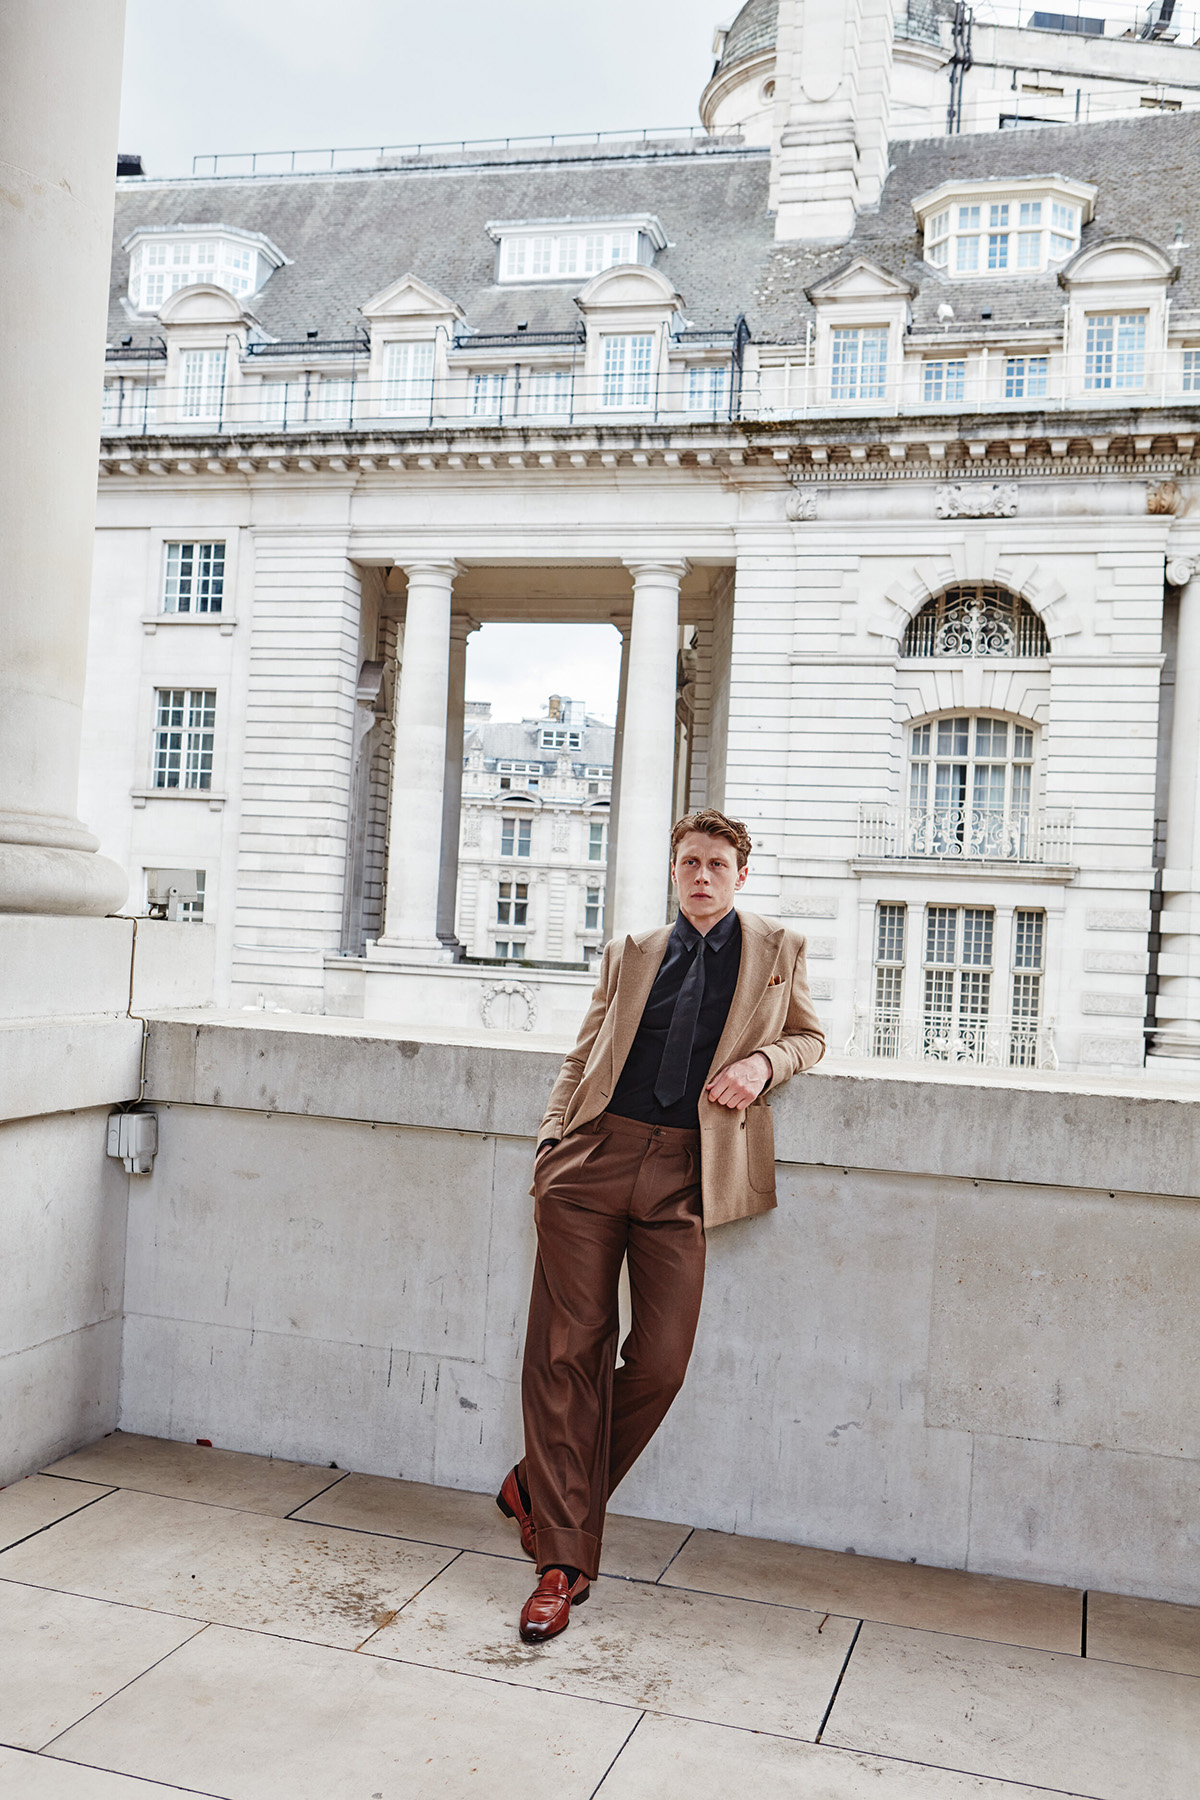 George MacKay covers Flaunt Magazine Issue 176 by Danny Kasirye